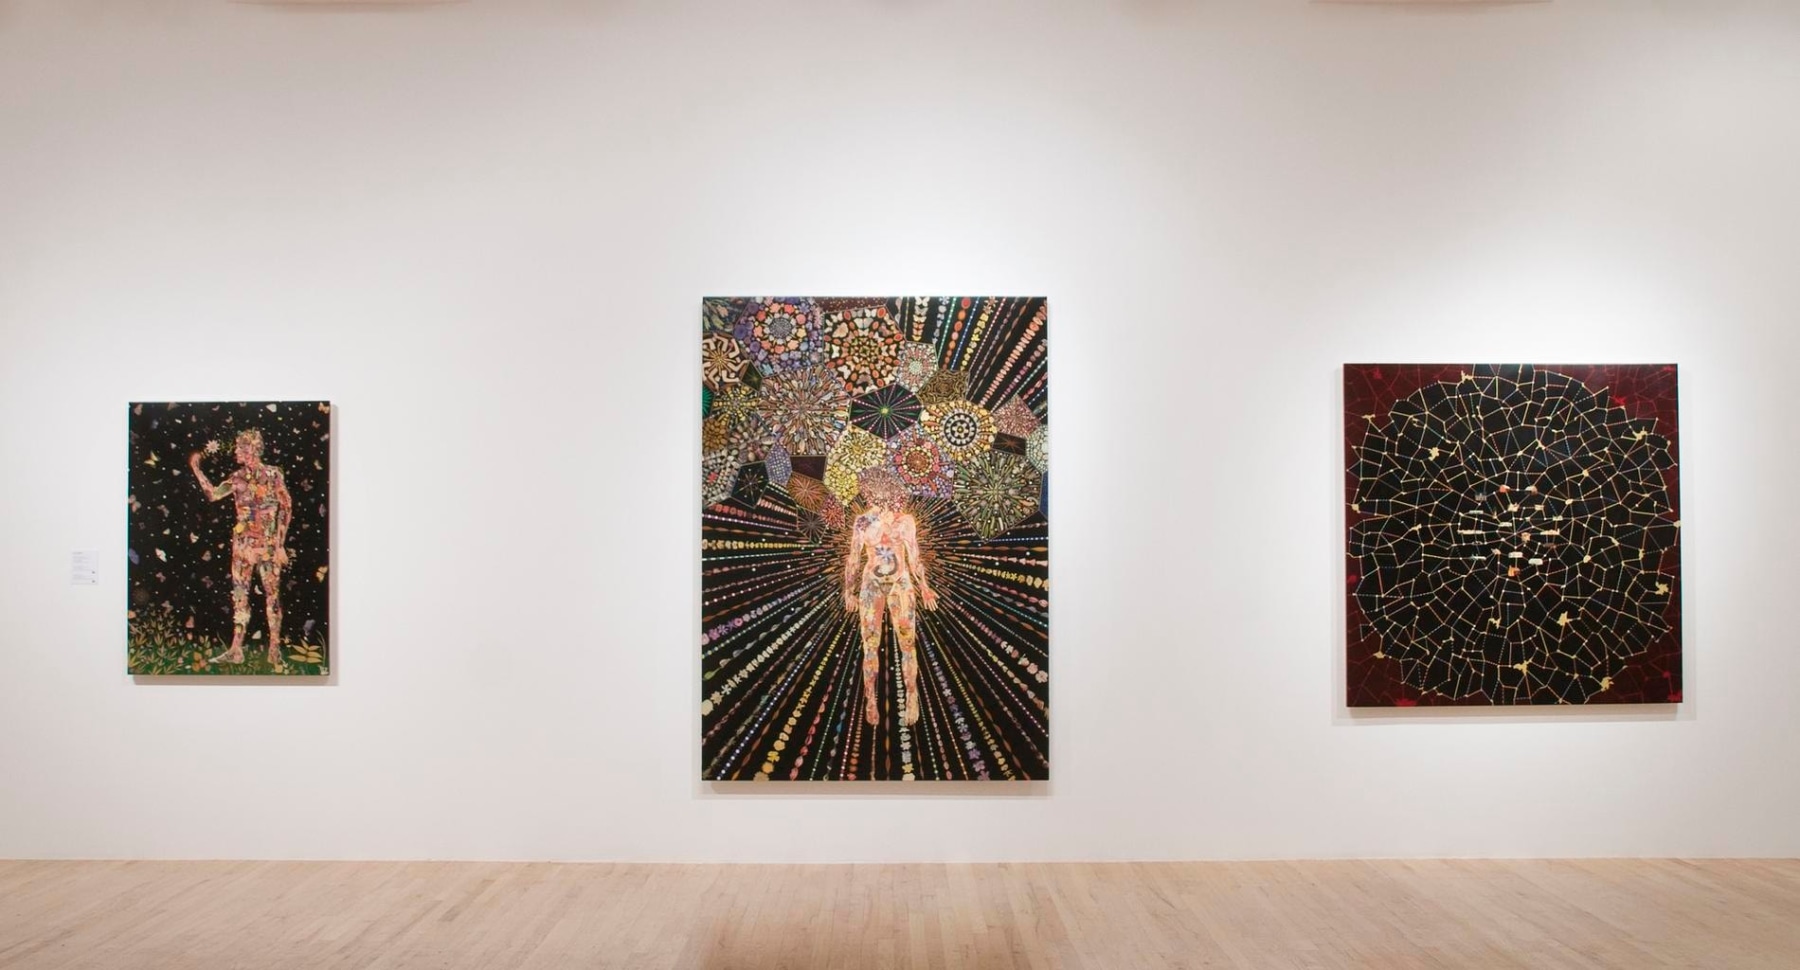 exhibition view of three of Fred Tomaselli's artworks